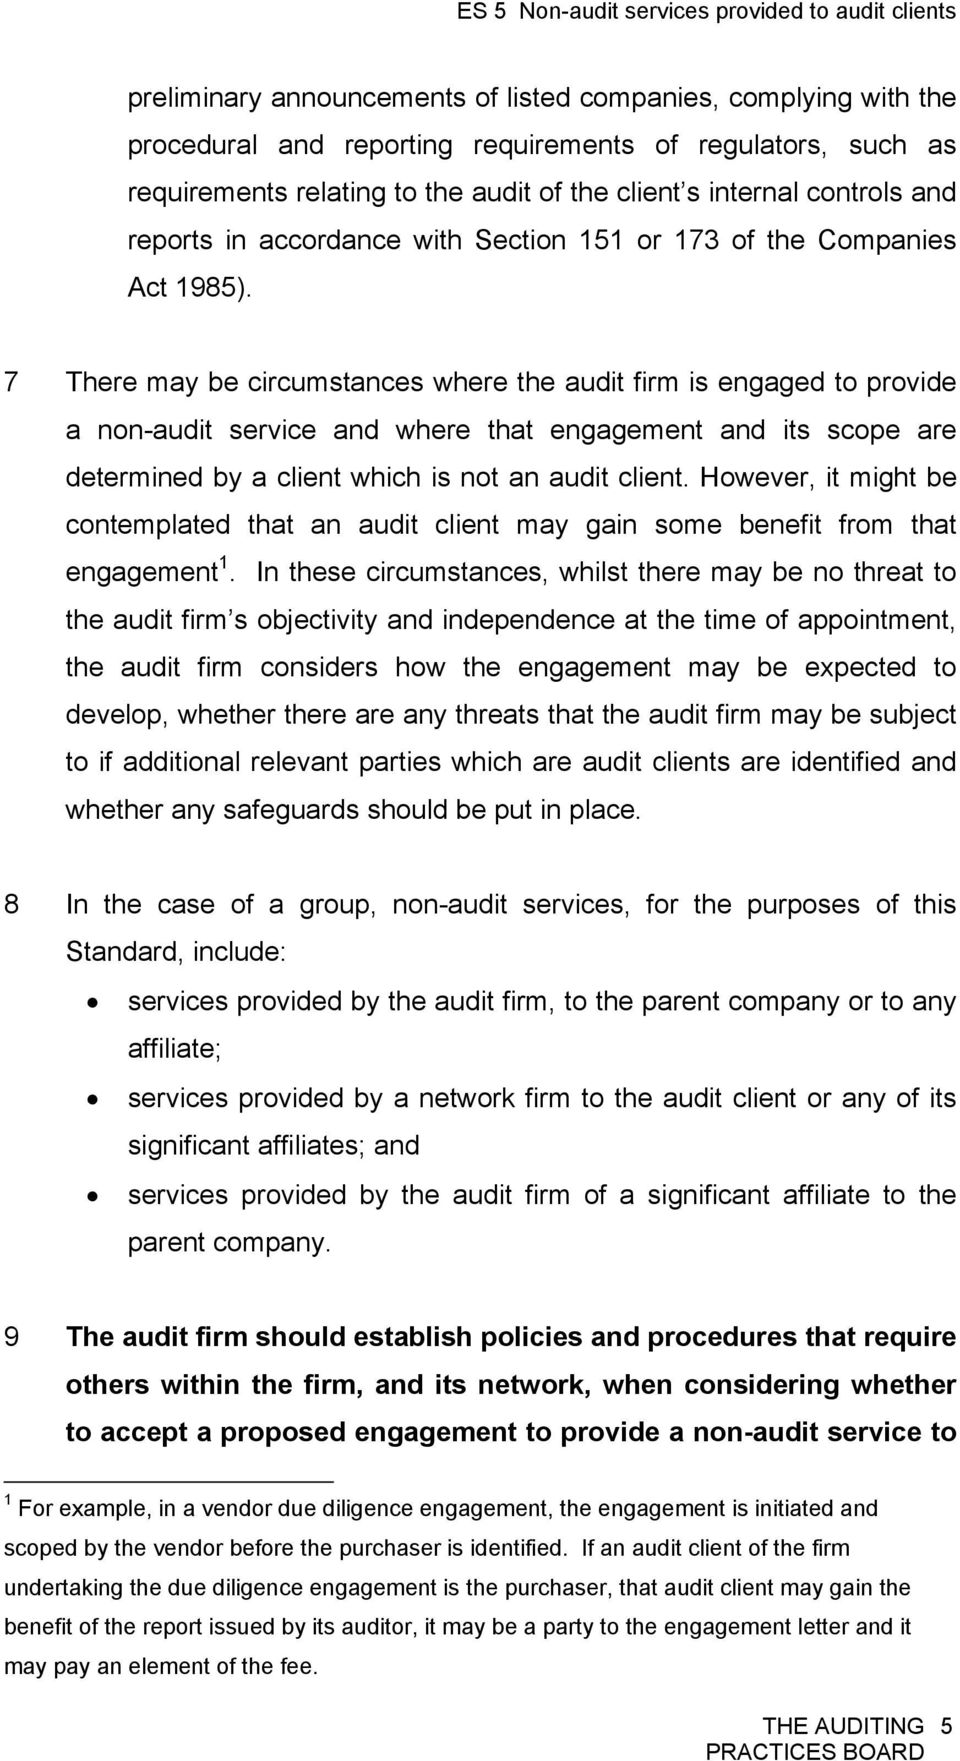 7 There may be circumstances where the audit firm is engaged to provide a non-audit service and where that engagement and its scope are determined by a client which is not an audit client.